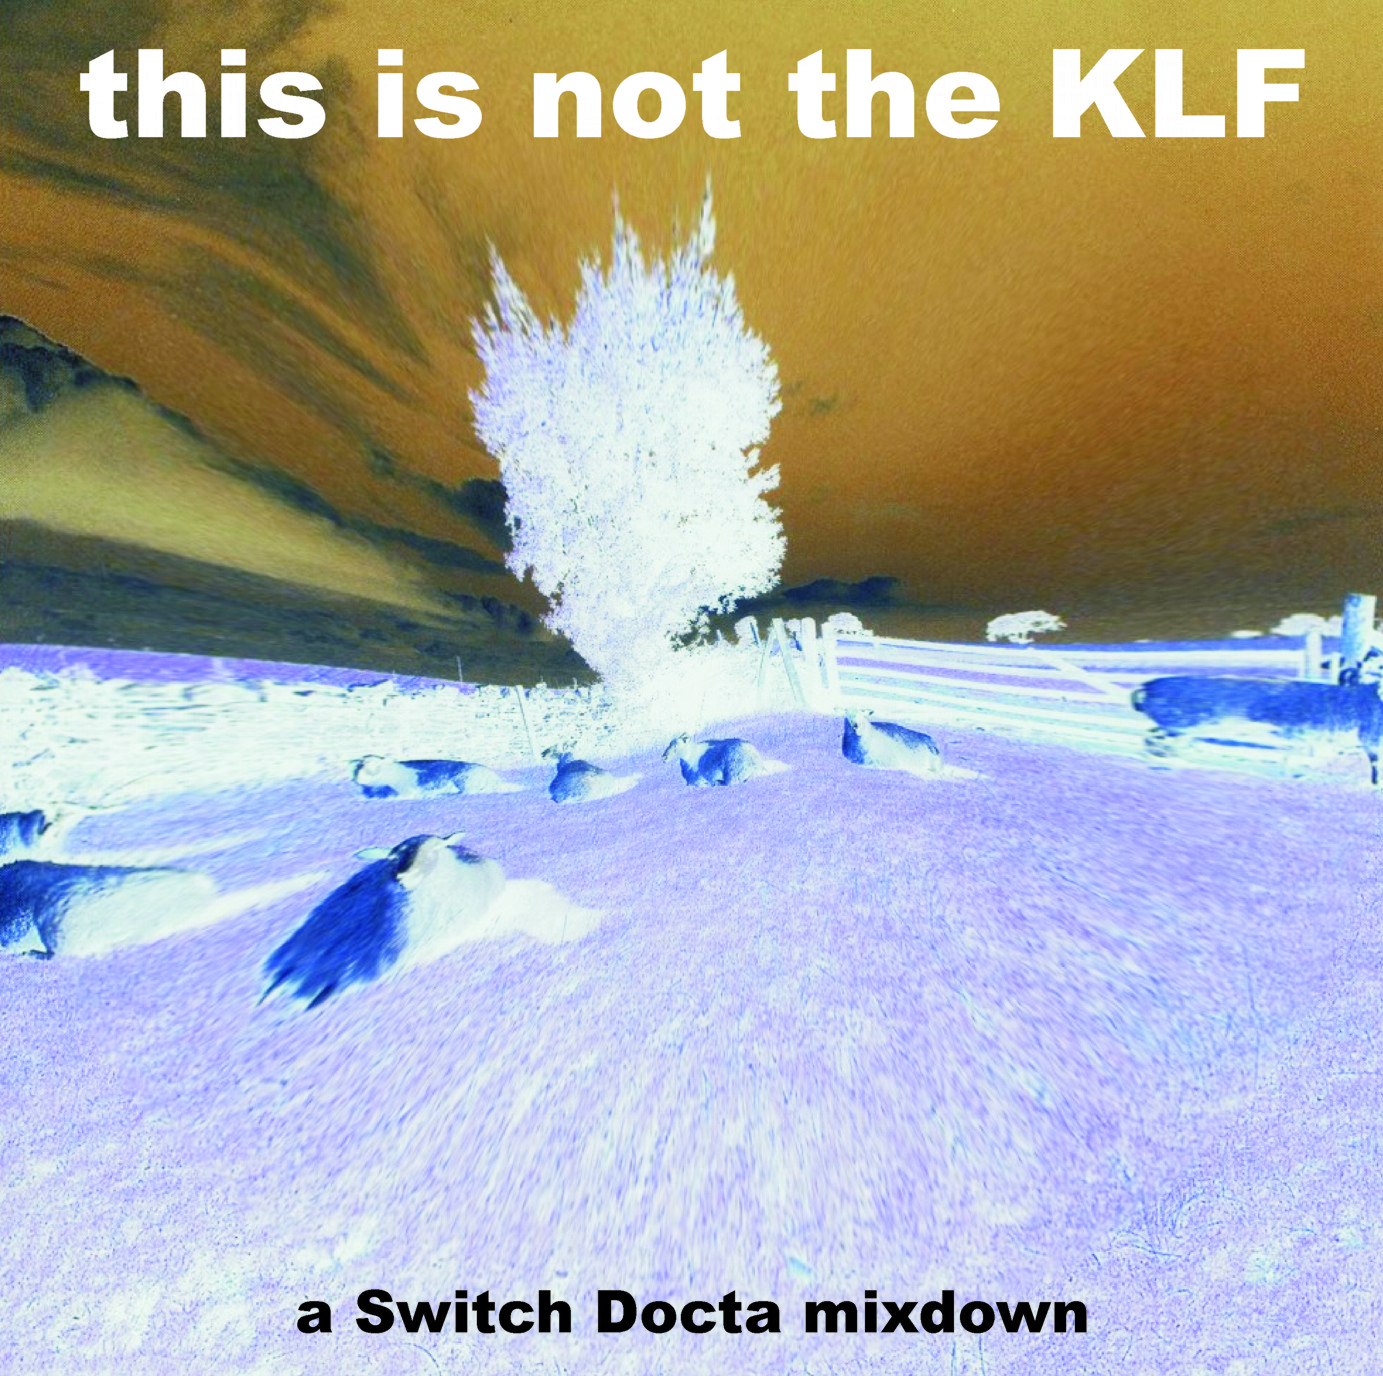 this is not the KLF